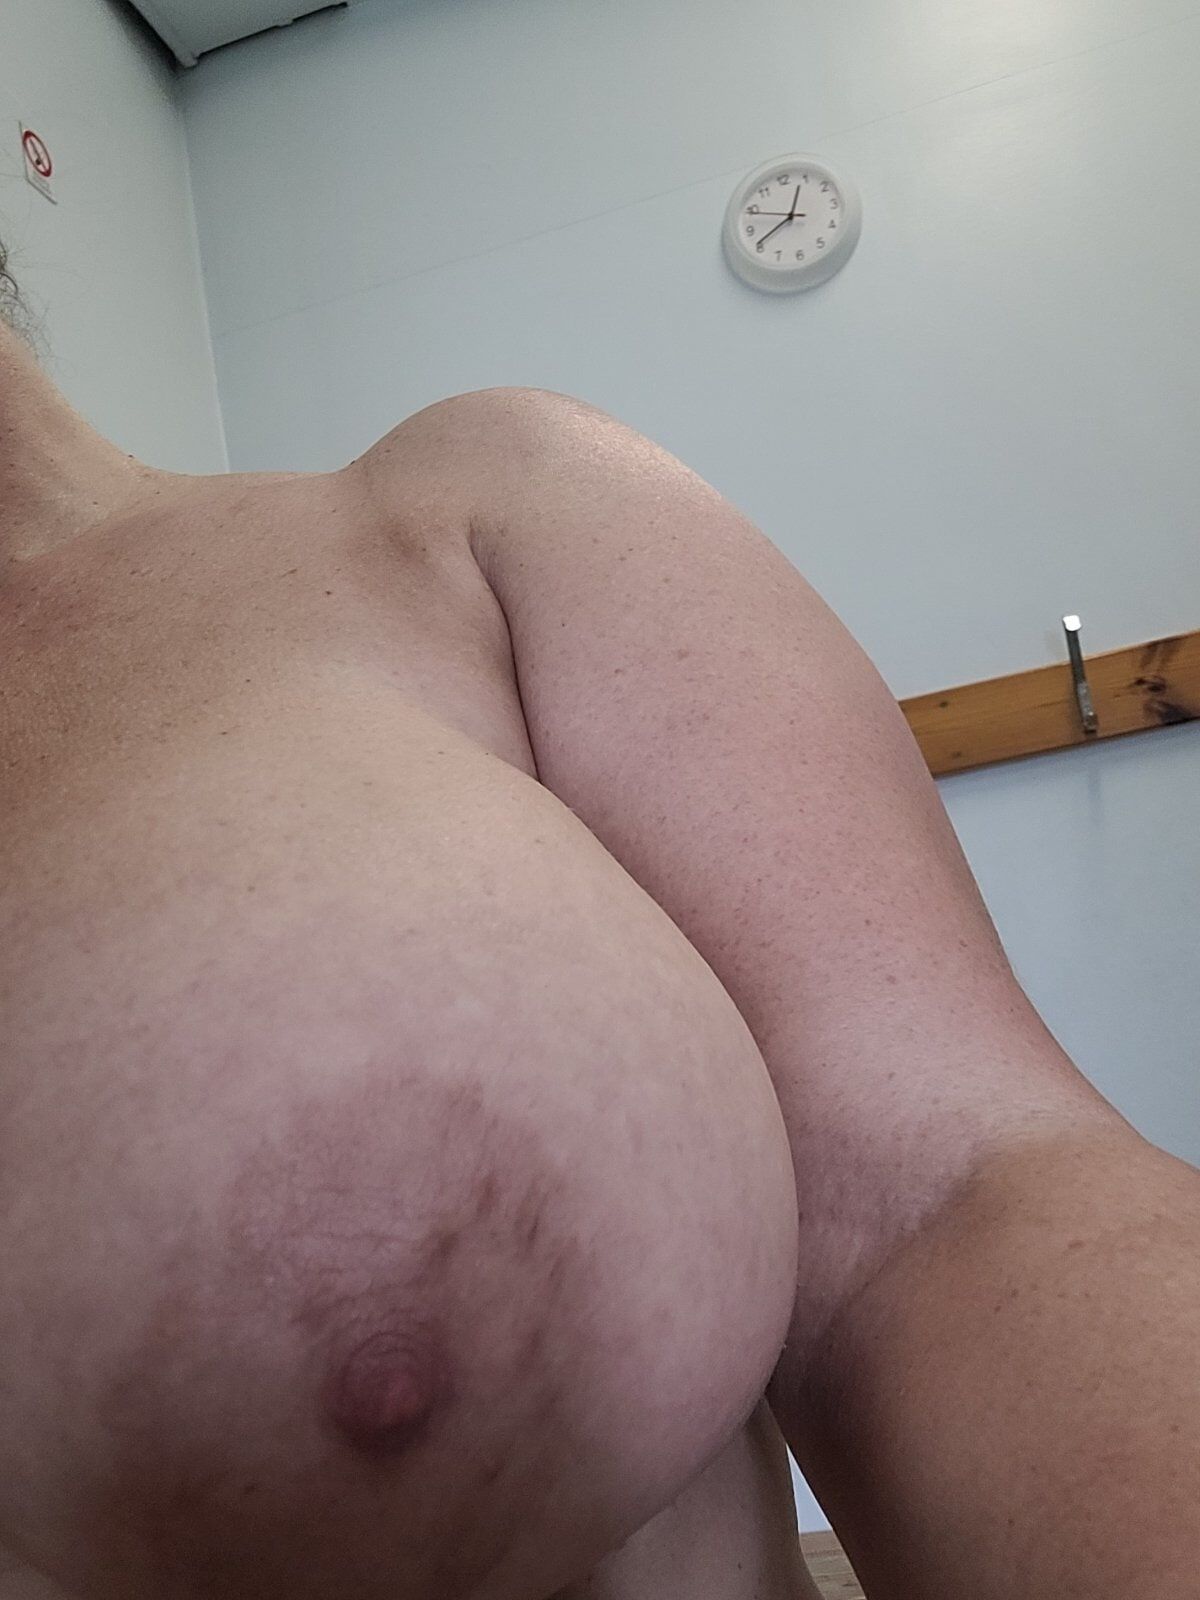 Wife alone in lockerroom after workout #5